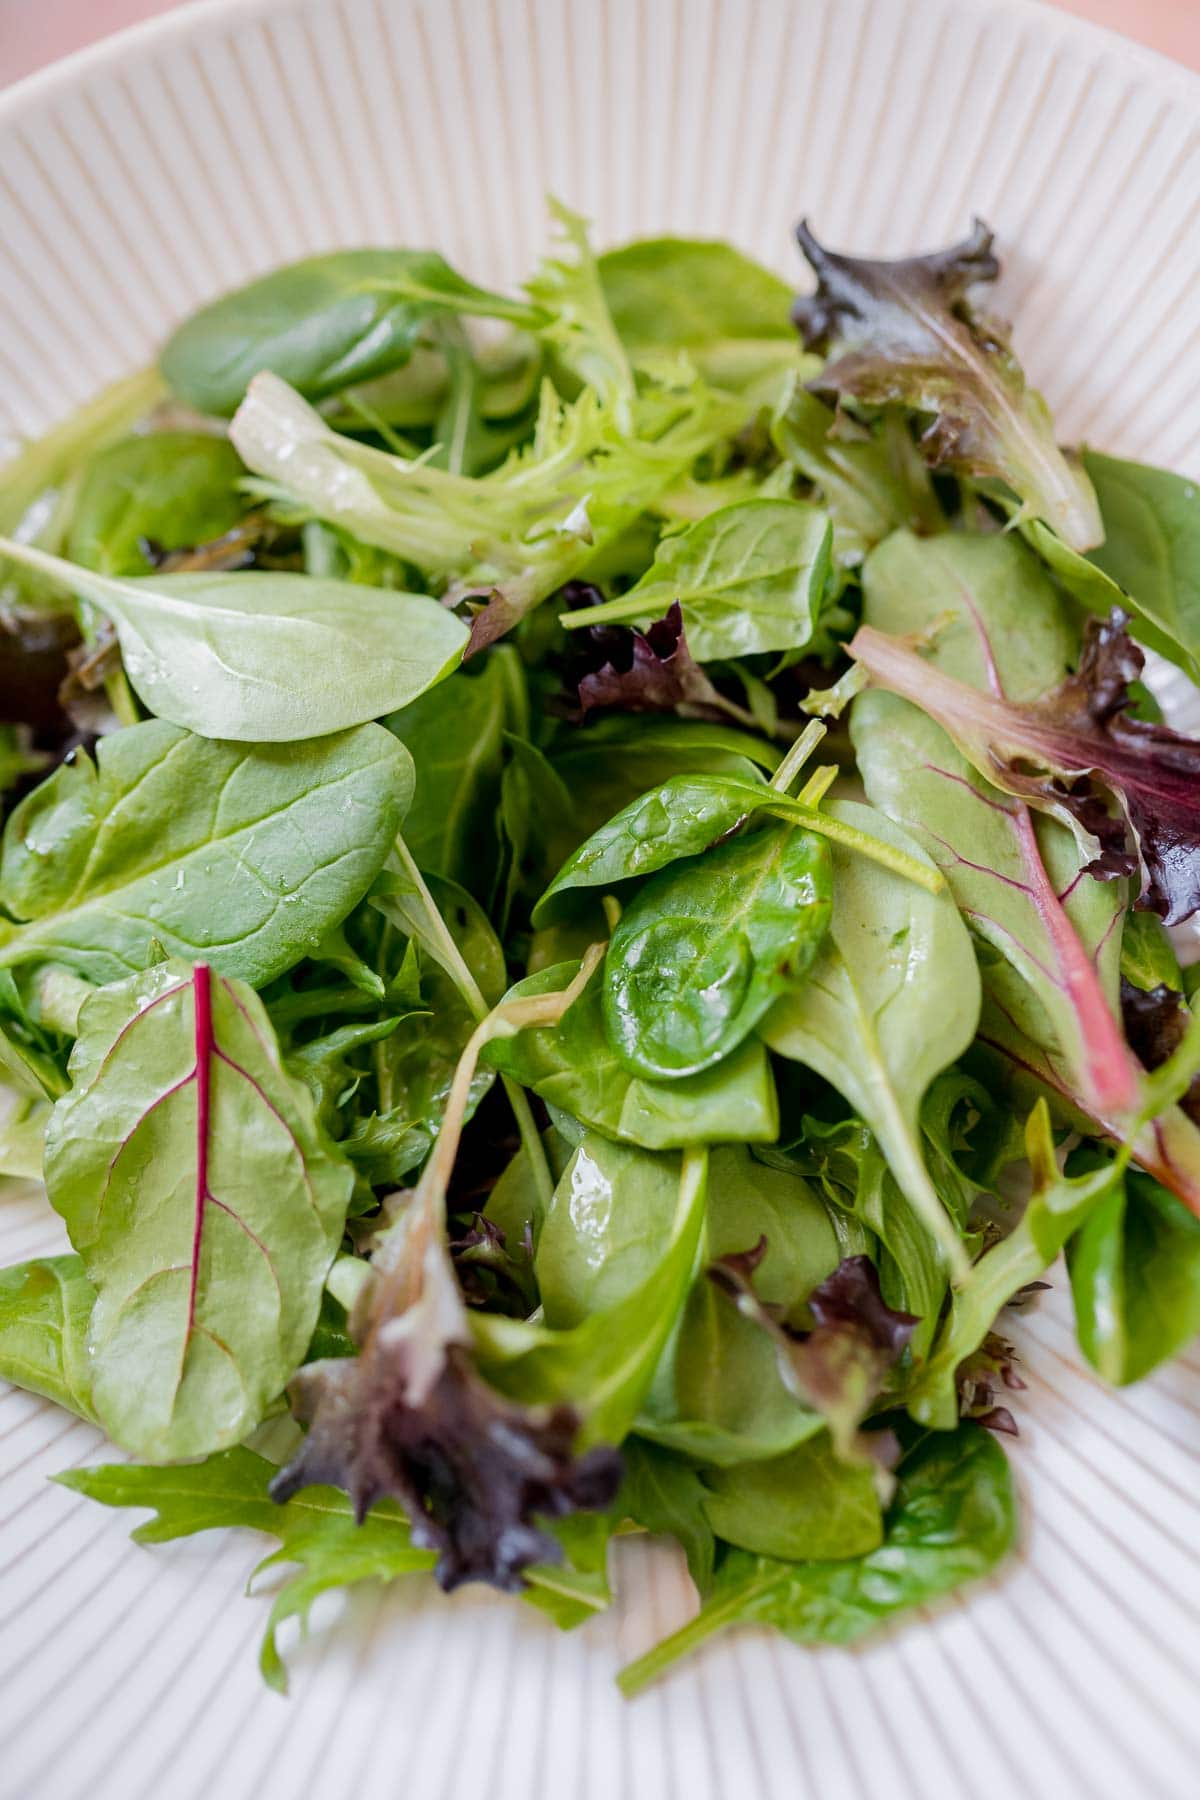 A large white ceramic bowl filled with fresh salad greens.